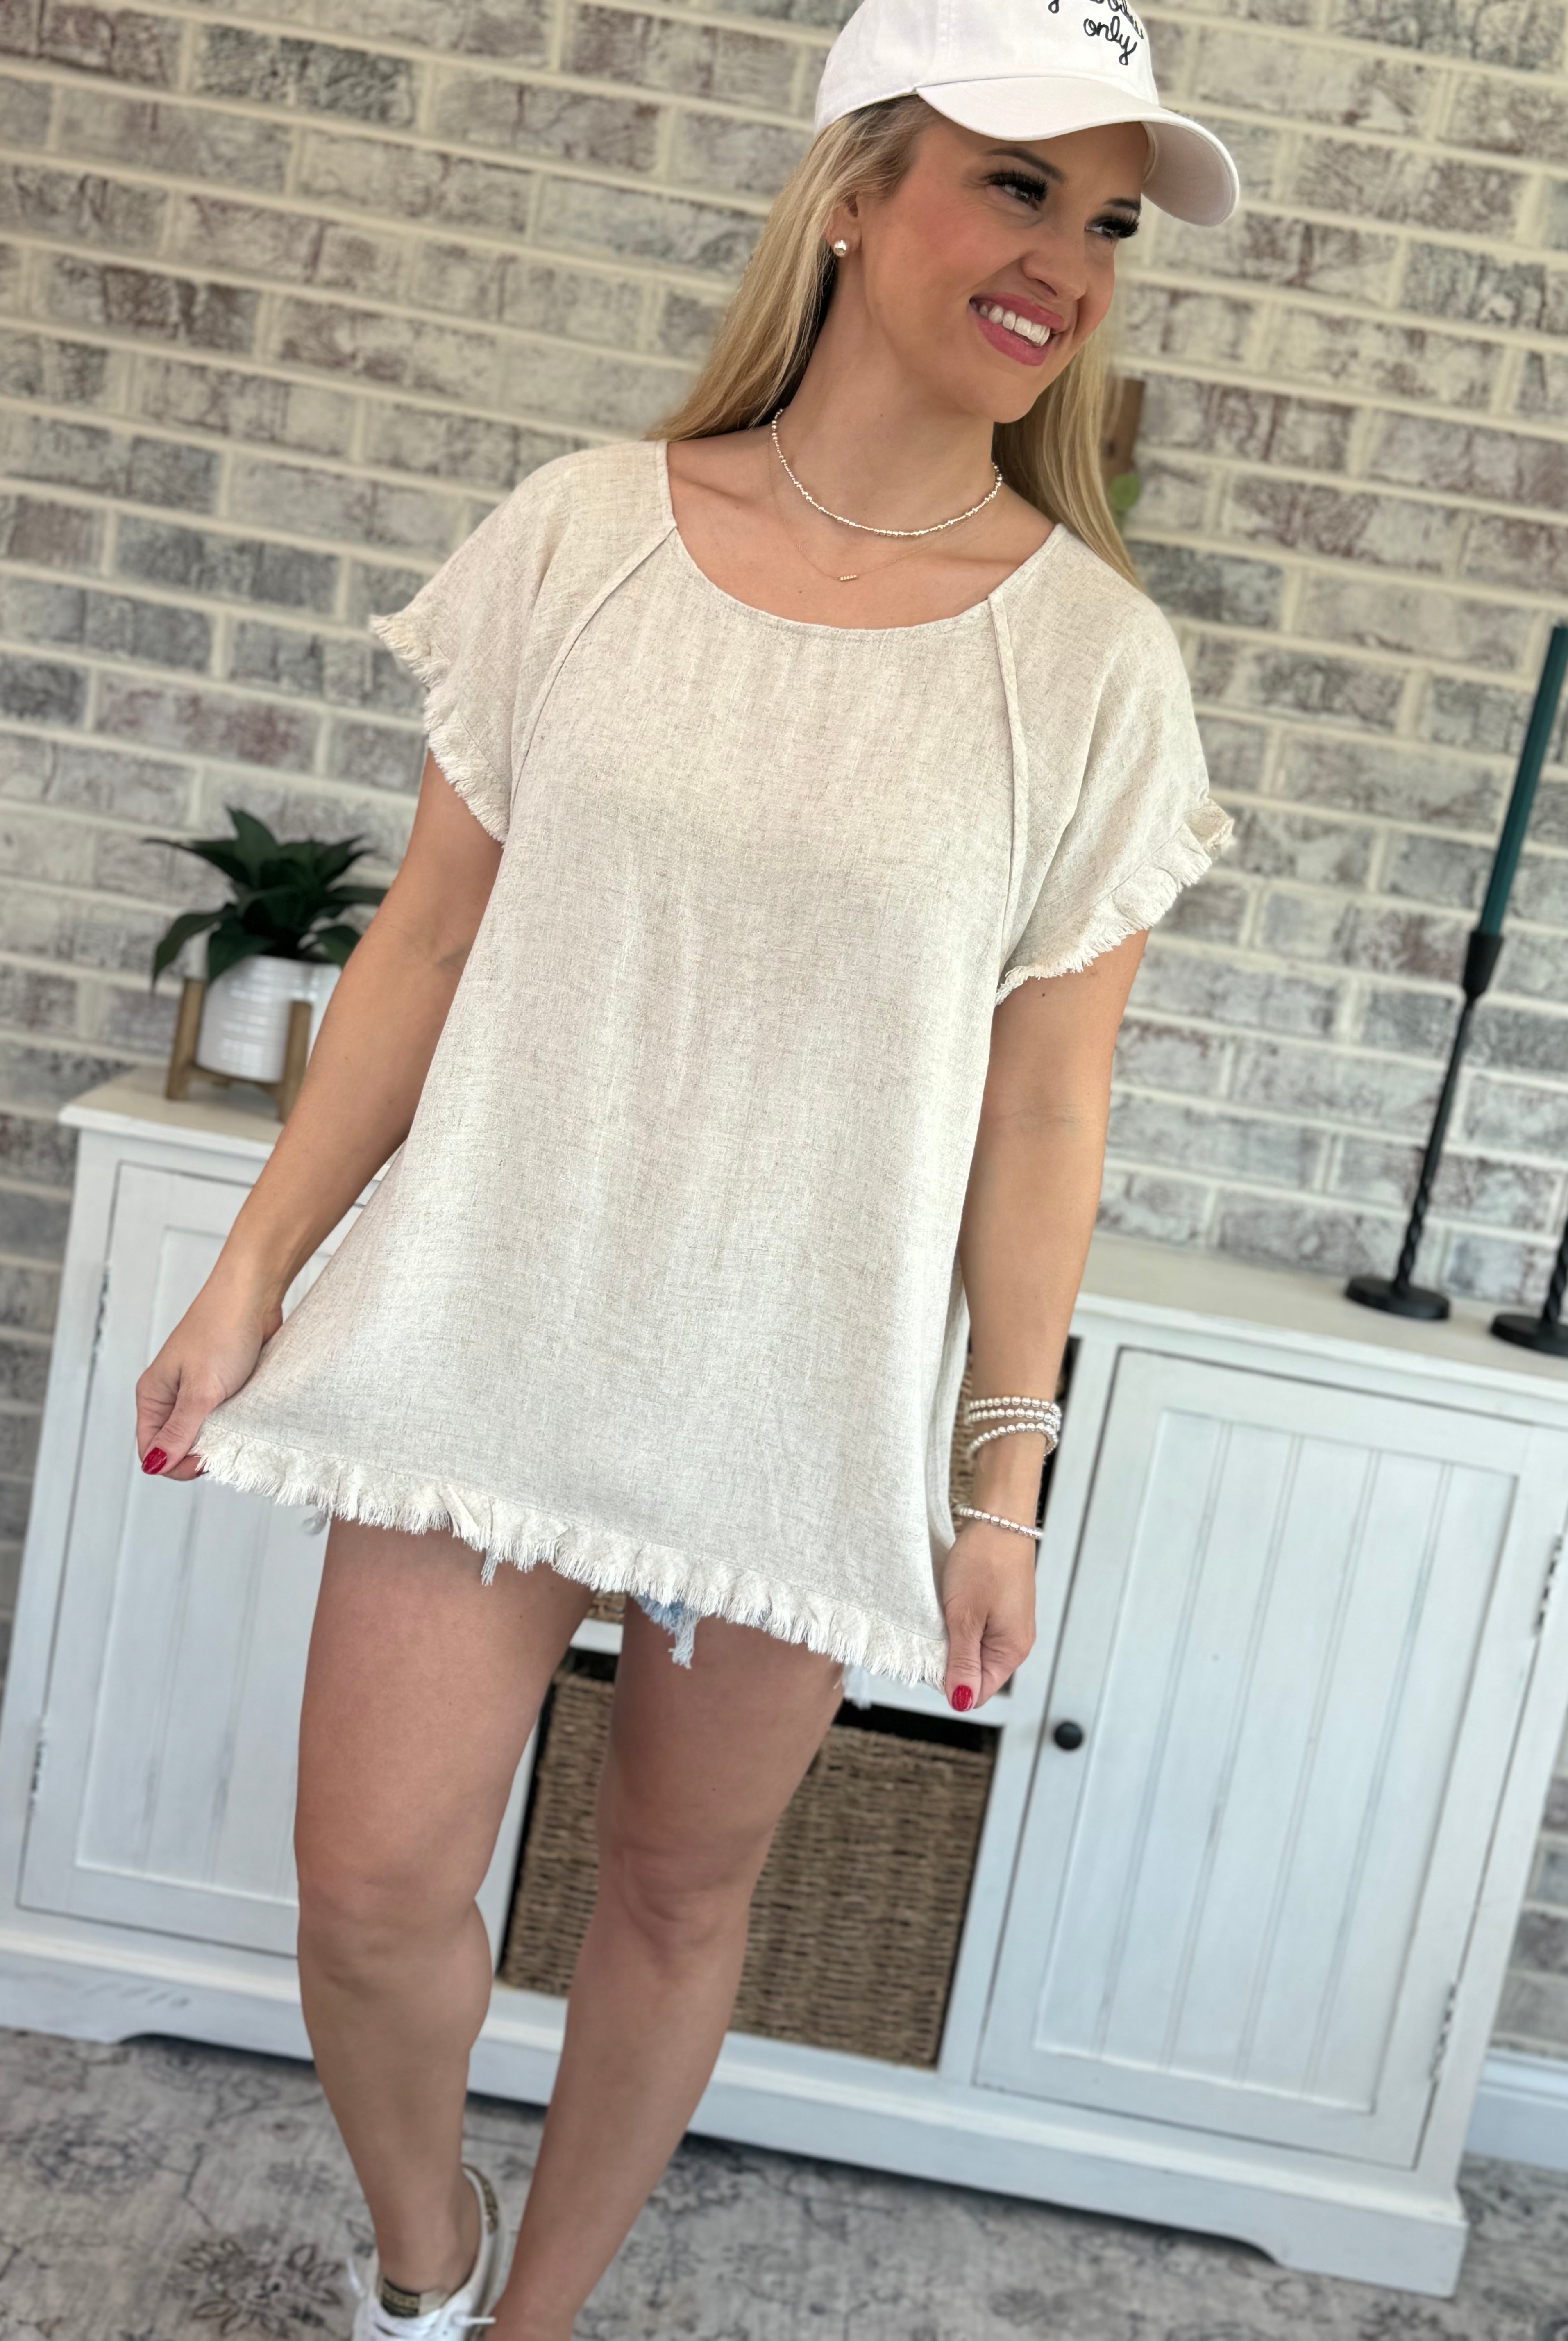 Take a Break Short Sleeve Top-100 Short Sleeve Tops-The Lovely Closet-The Lovely Closet, Women's Fashion Boutique in Alexandria, KY